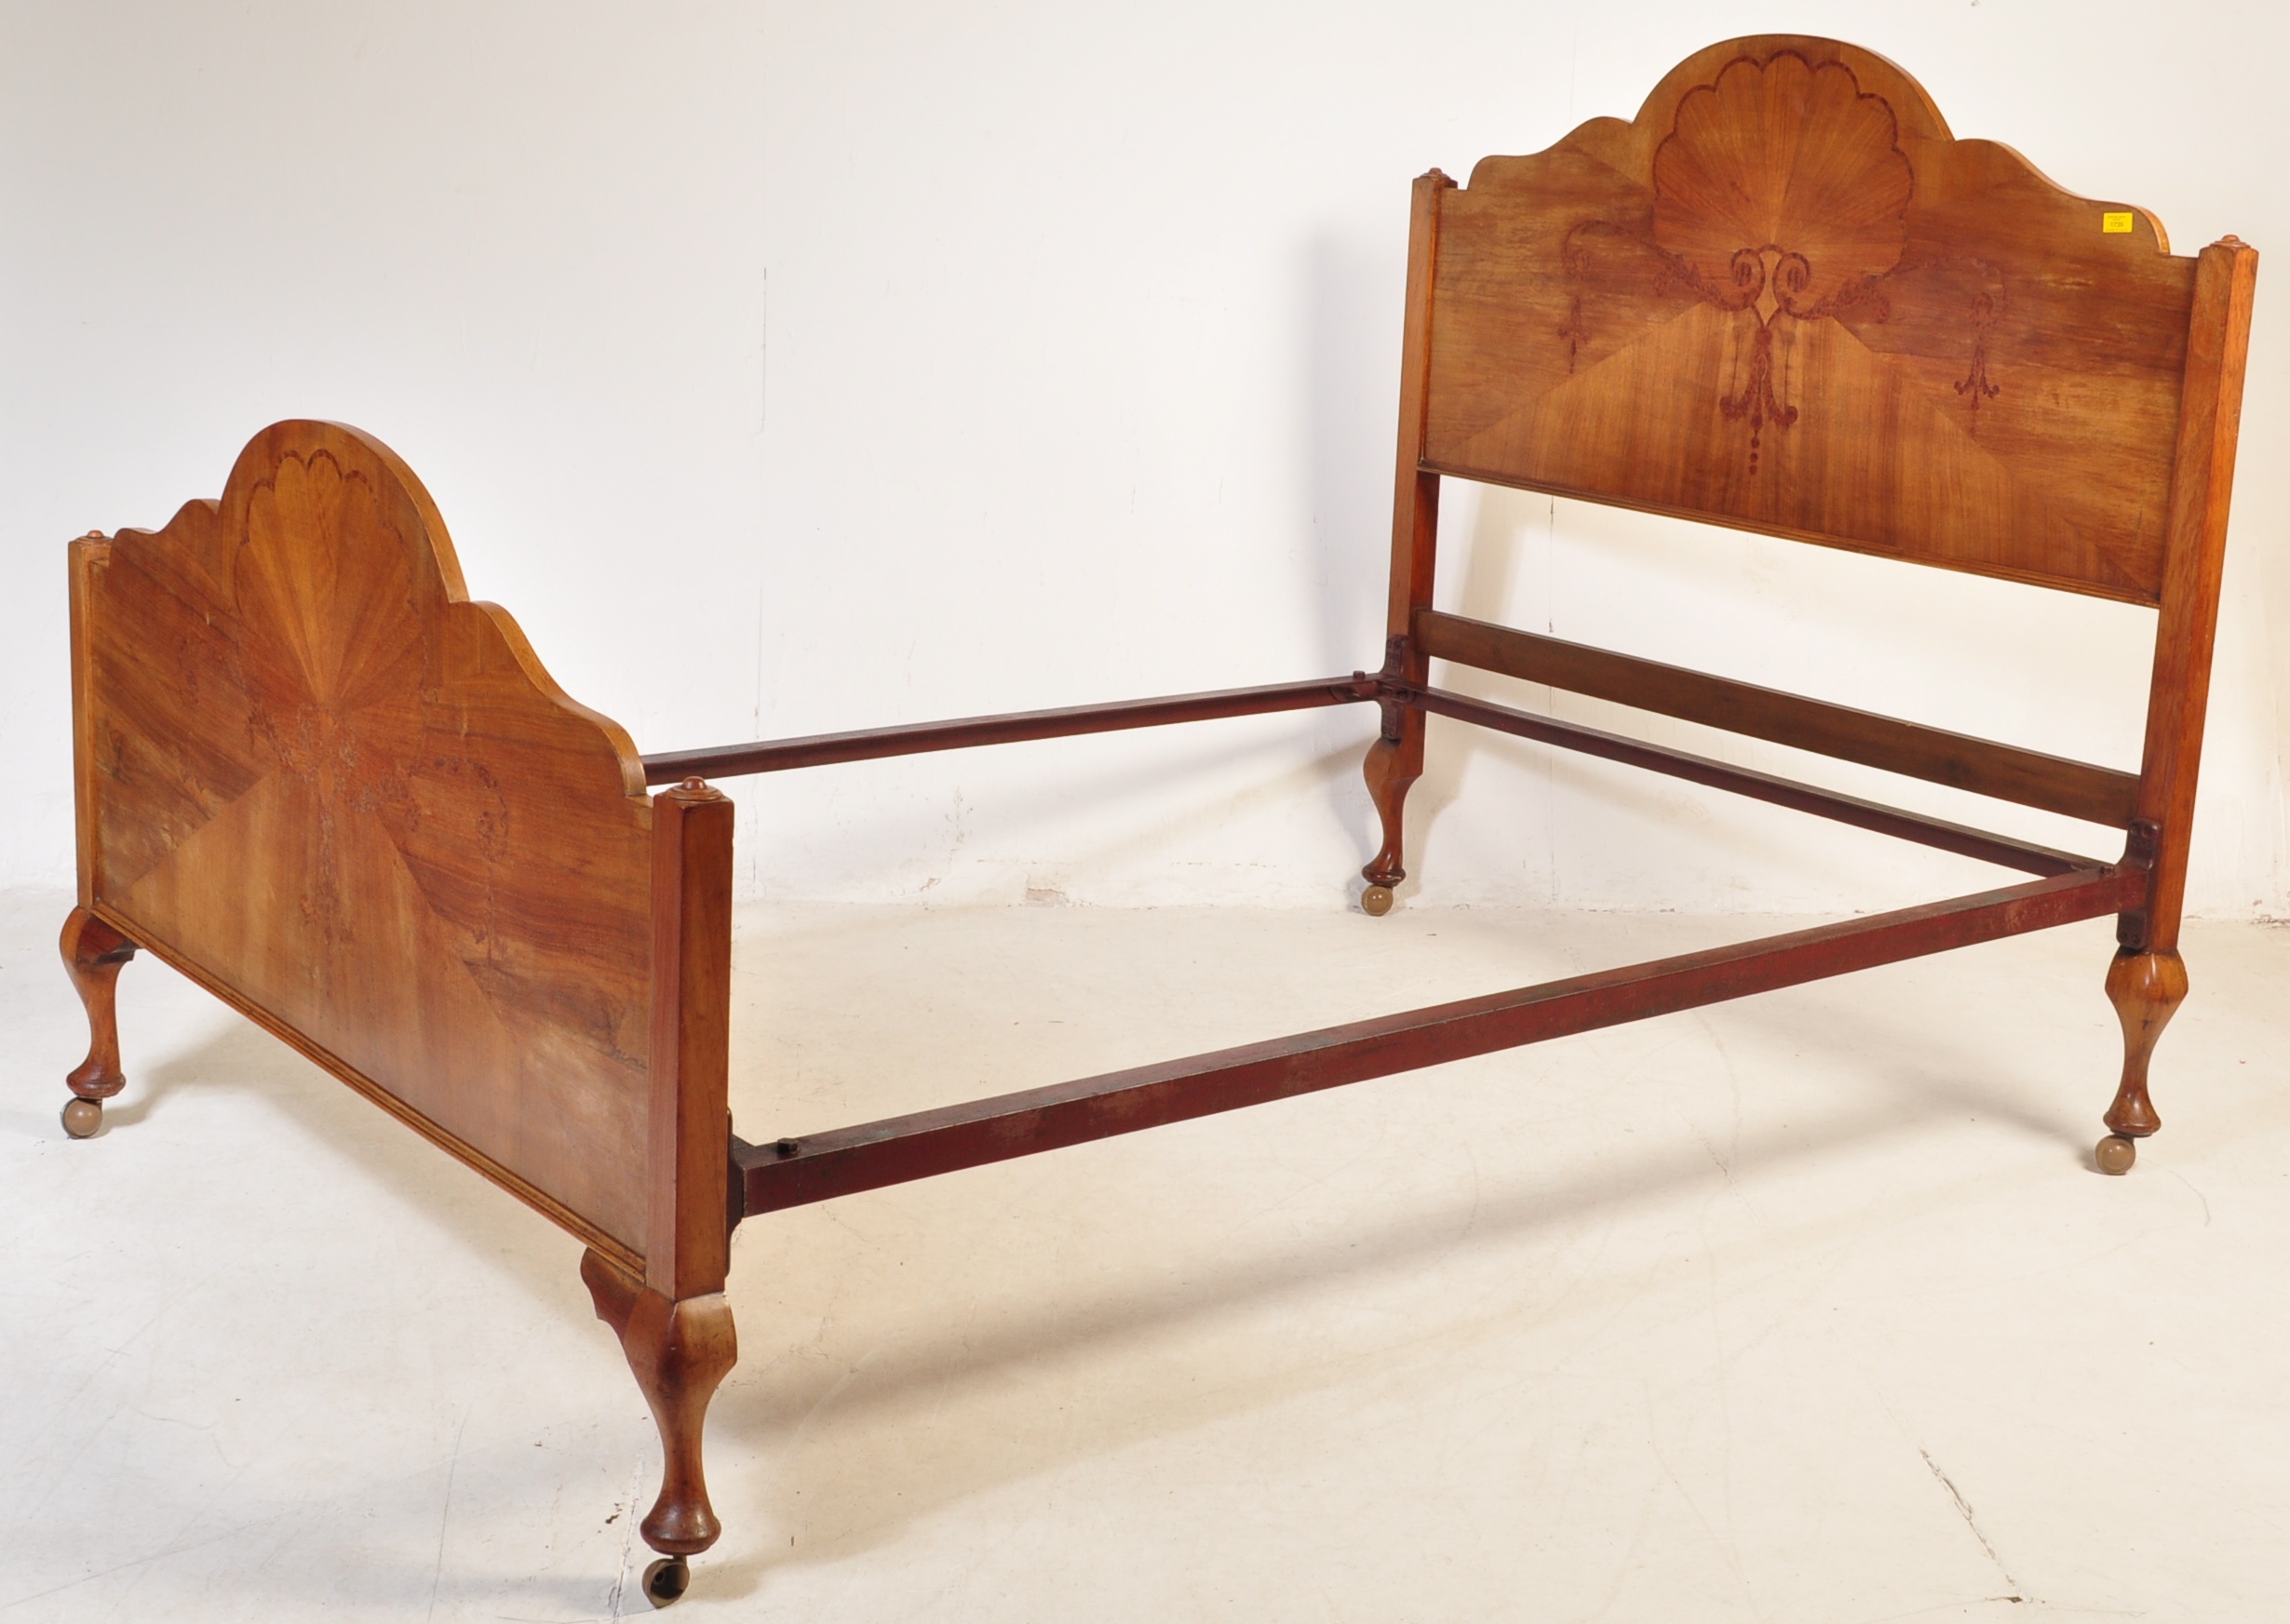 EARLY 20TH CENTURY ART DECO BURR WALNUT BED FRAME - Image 2 of 6